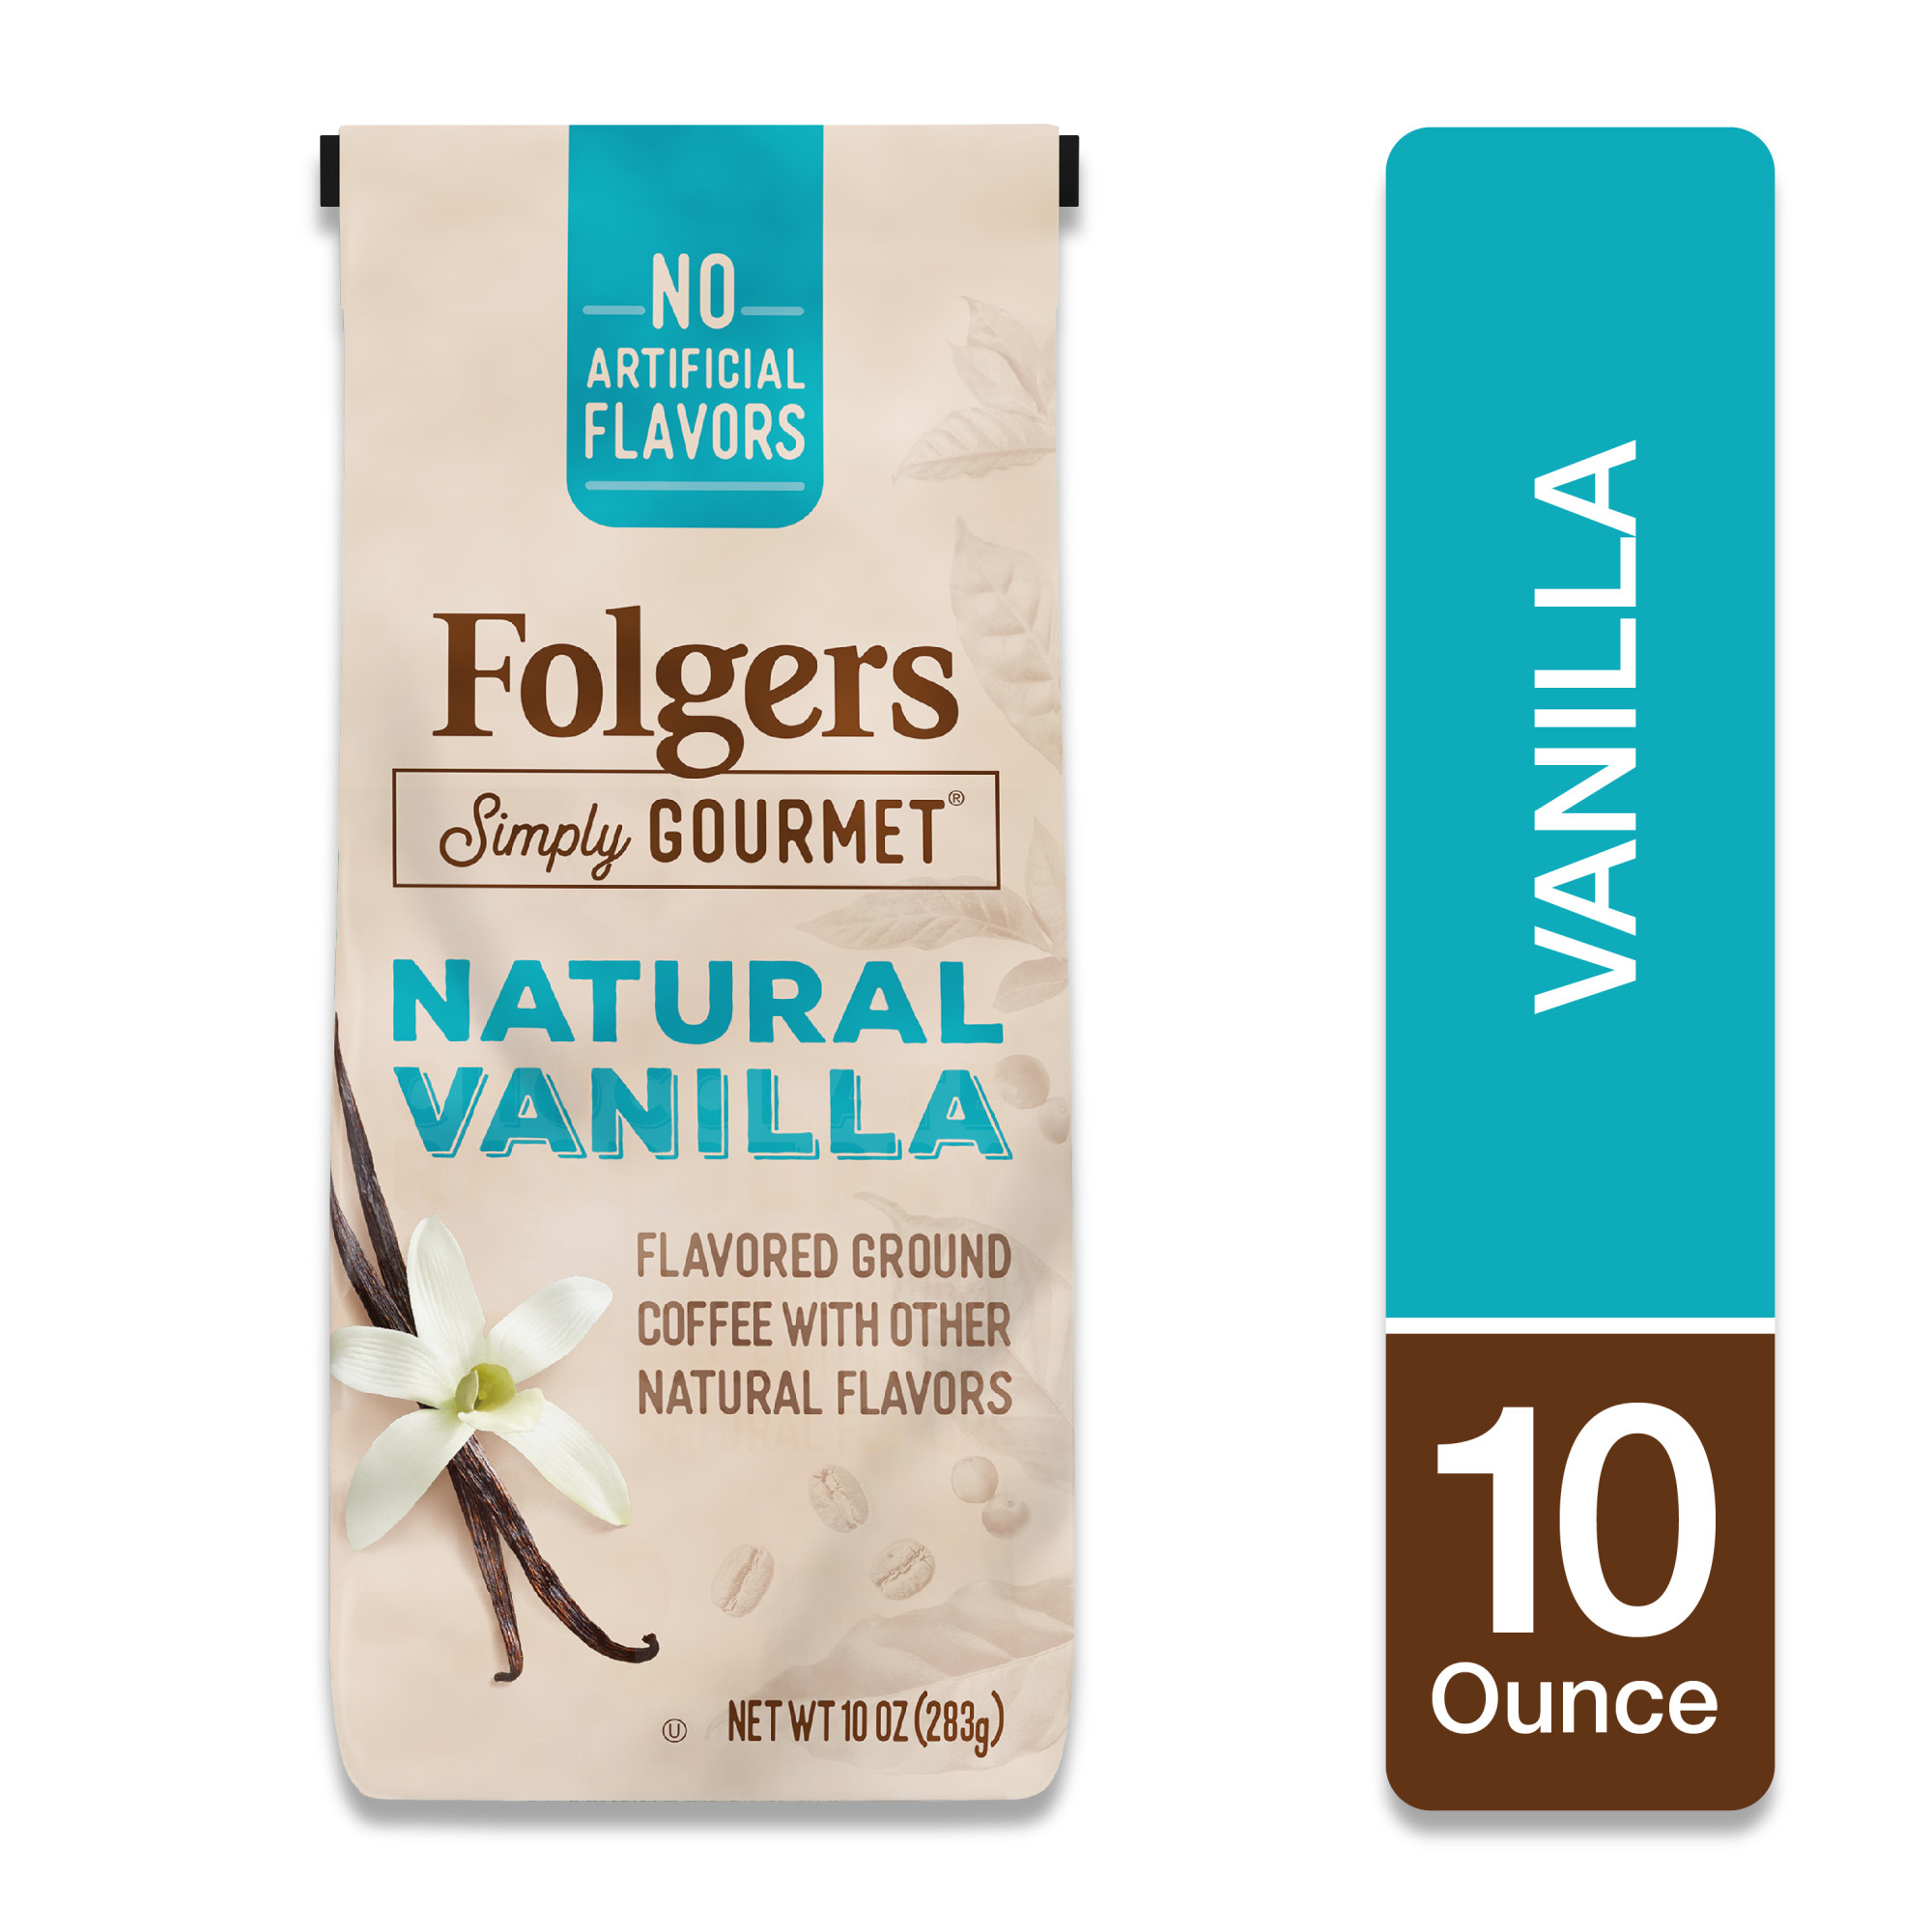 Folgers Simply Gourmet Natural Vanilla Flavored Ground Coffee, With Other Natural Flavors, 10-Ounce Bag - image 3 of 6